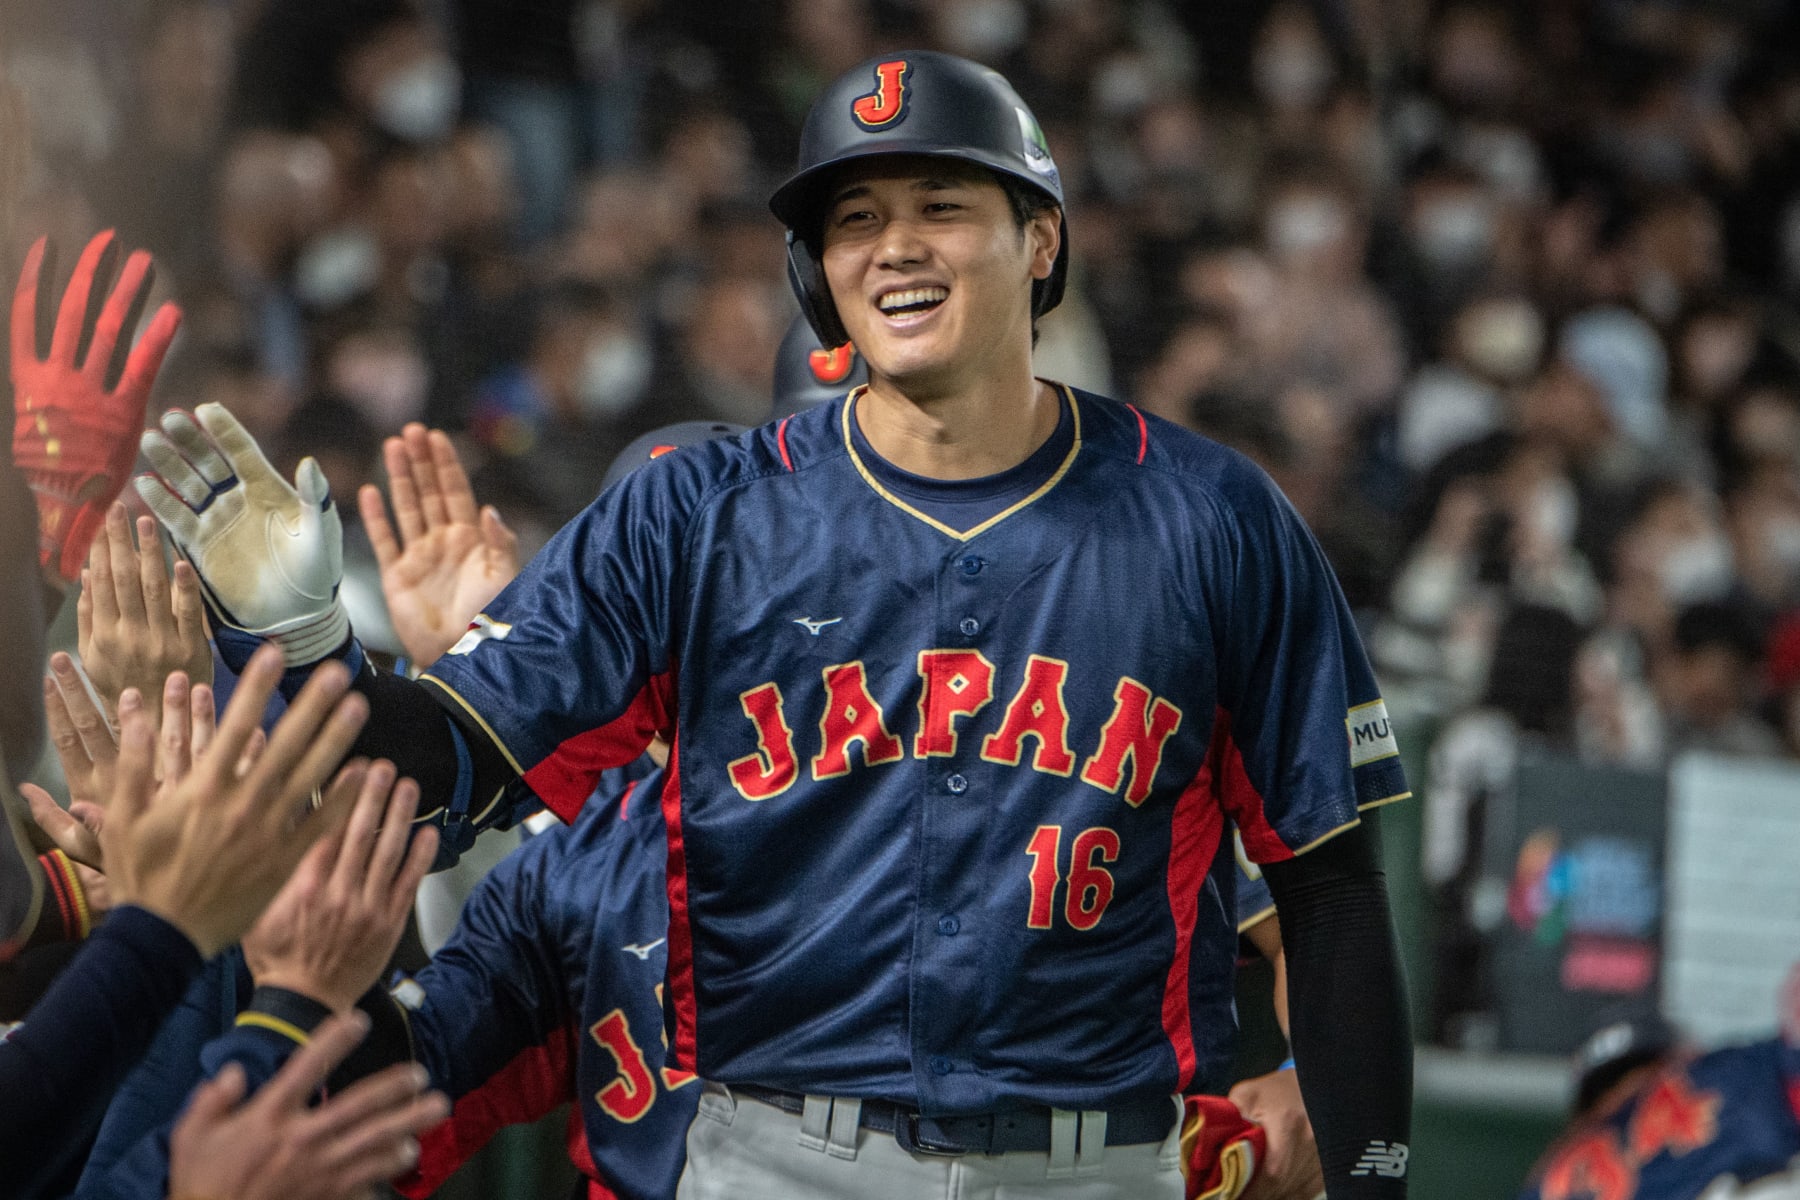 WBC Power Rankings: U.S. brings its best; who has chance at upset